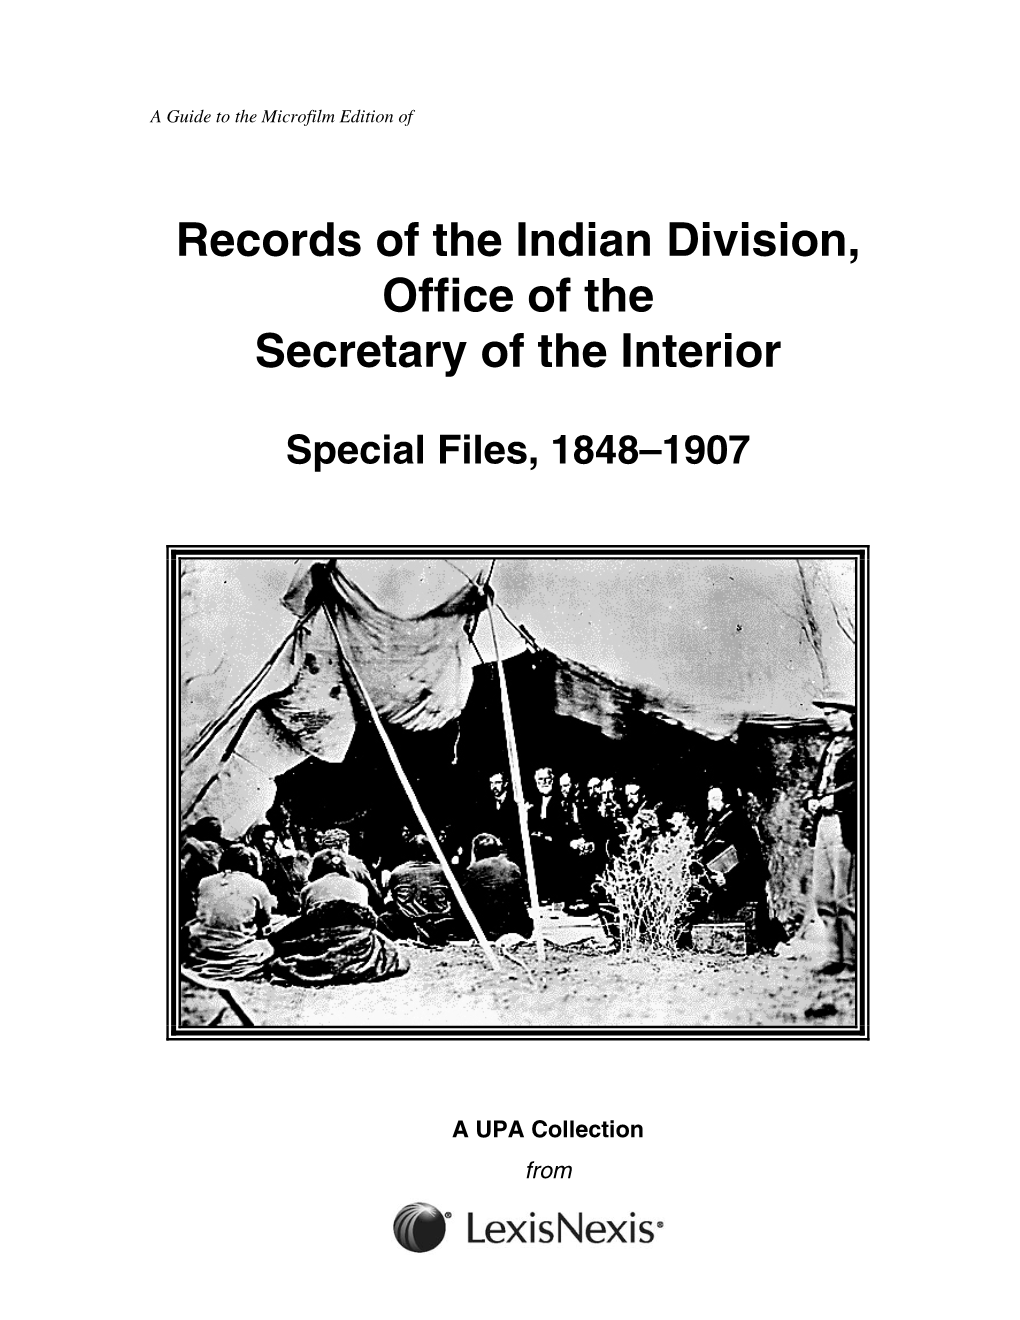 Records of the Indian Division, Office of the Secretary of the Interior